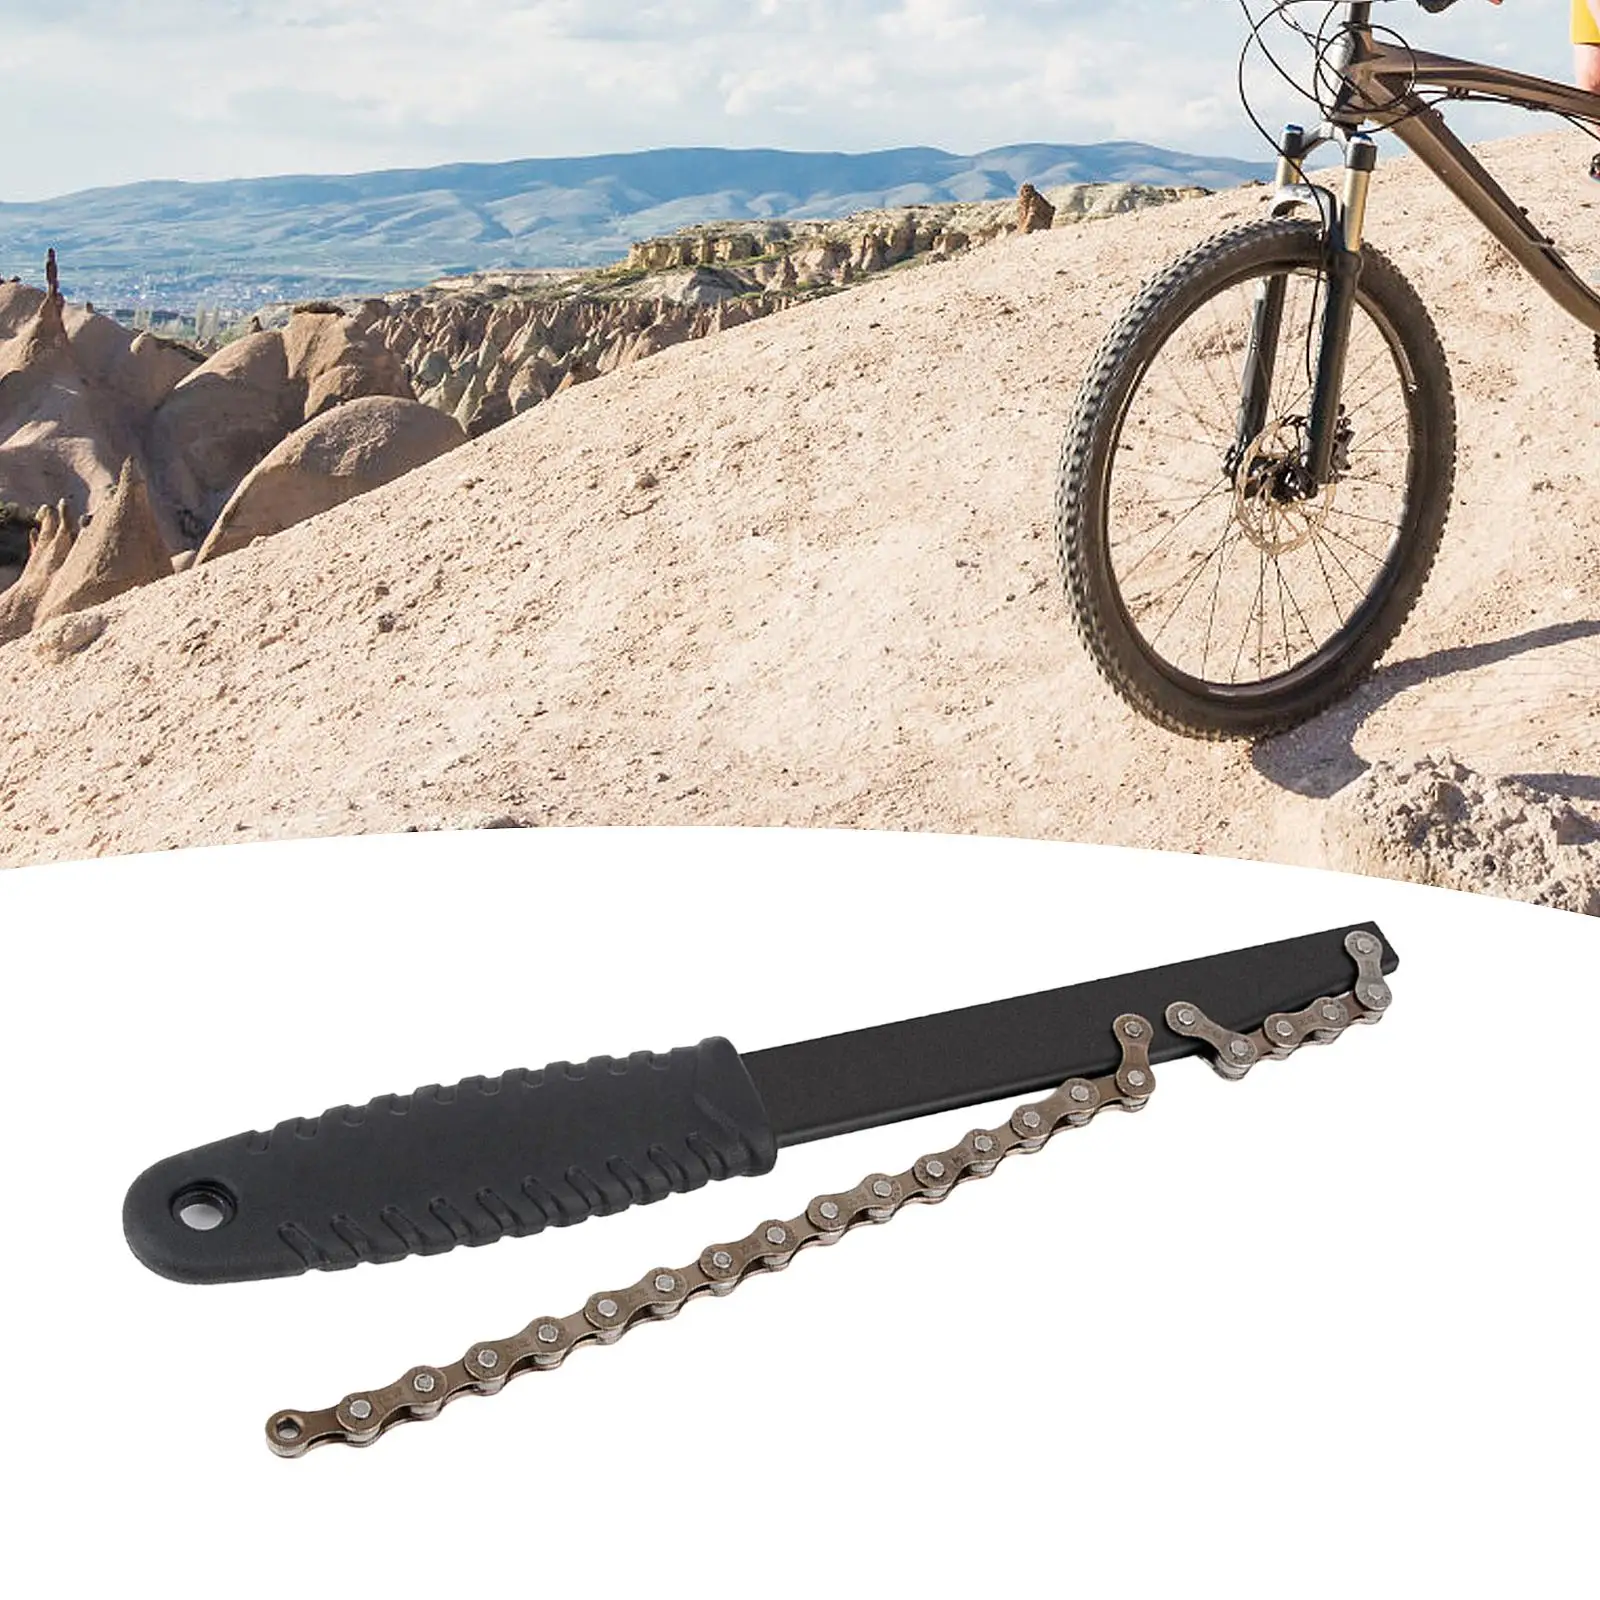 Bike Cassette Removal Tool Freewheel Wrench Wrench Durable Hand Tool Cassette Tool Chain Whip Bottom Tool for Riding Outdoor